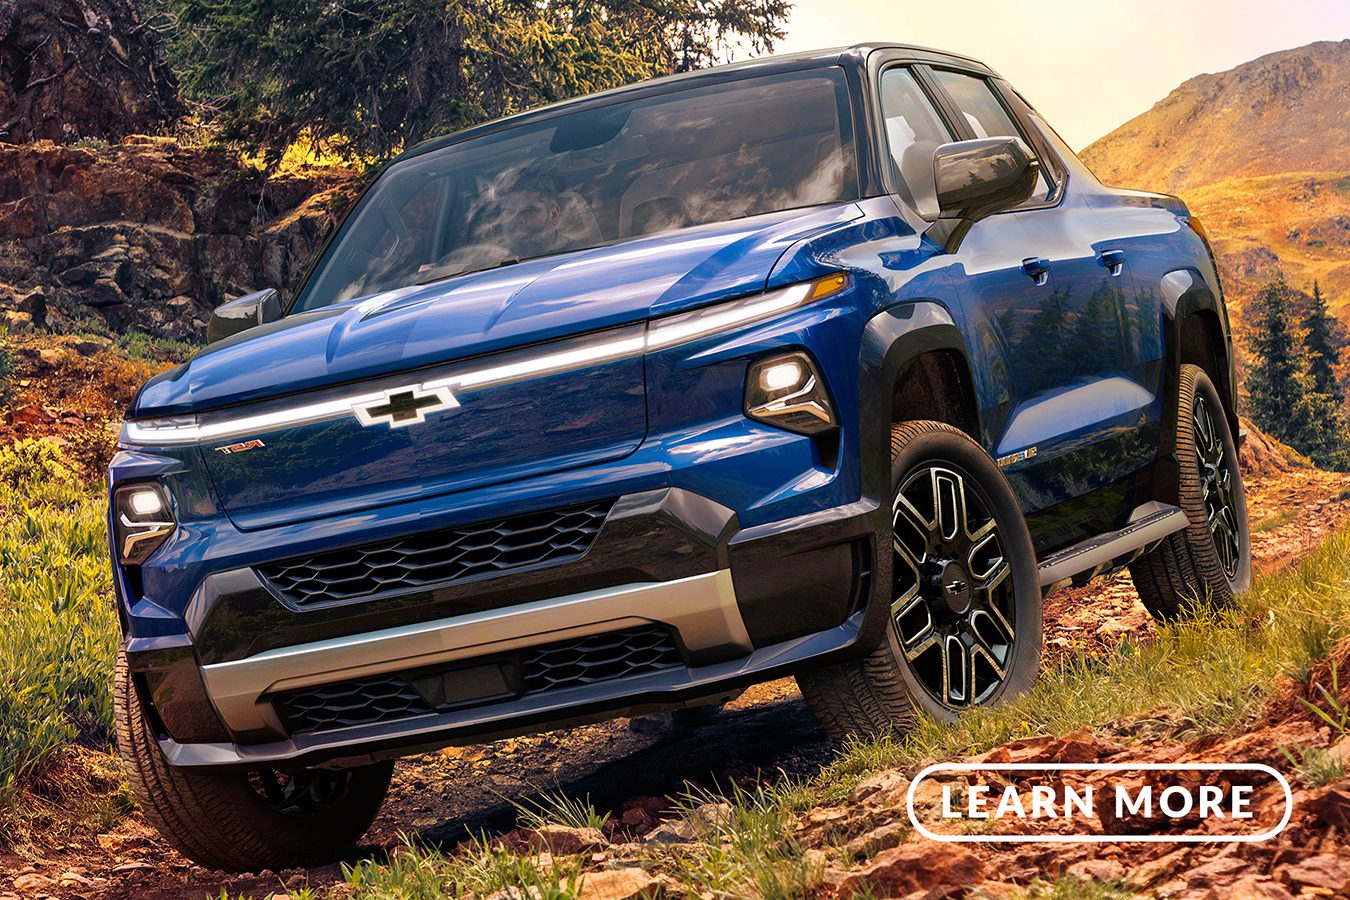 The 2020 chevrolet colorado is driving down a rocky trail.